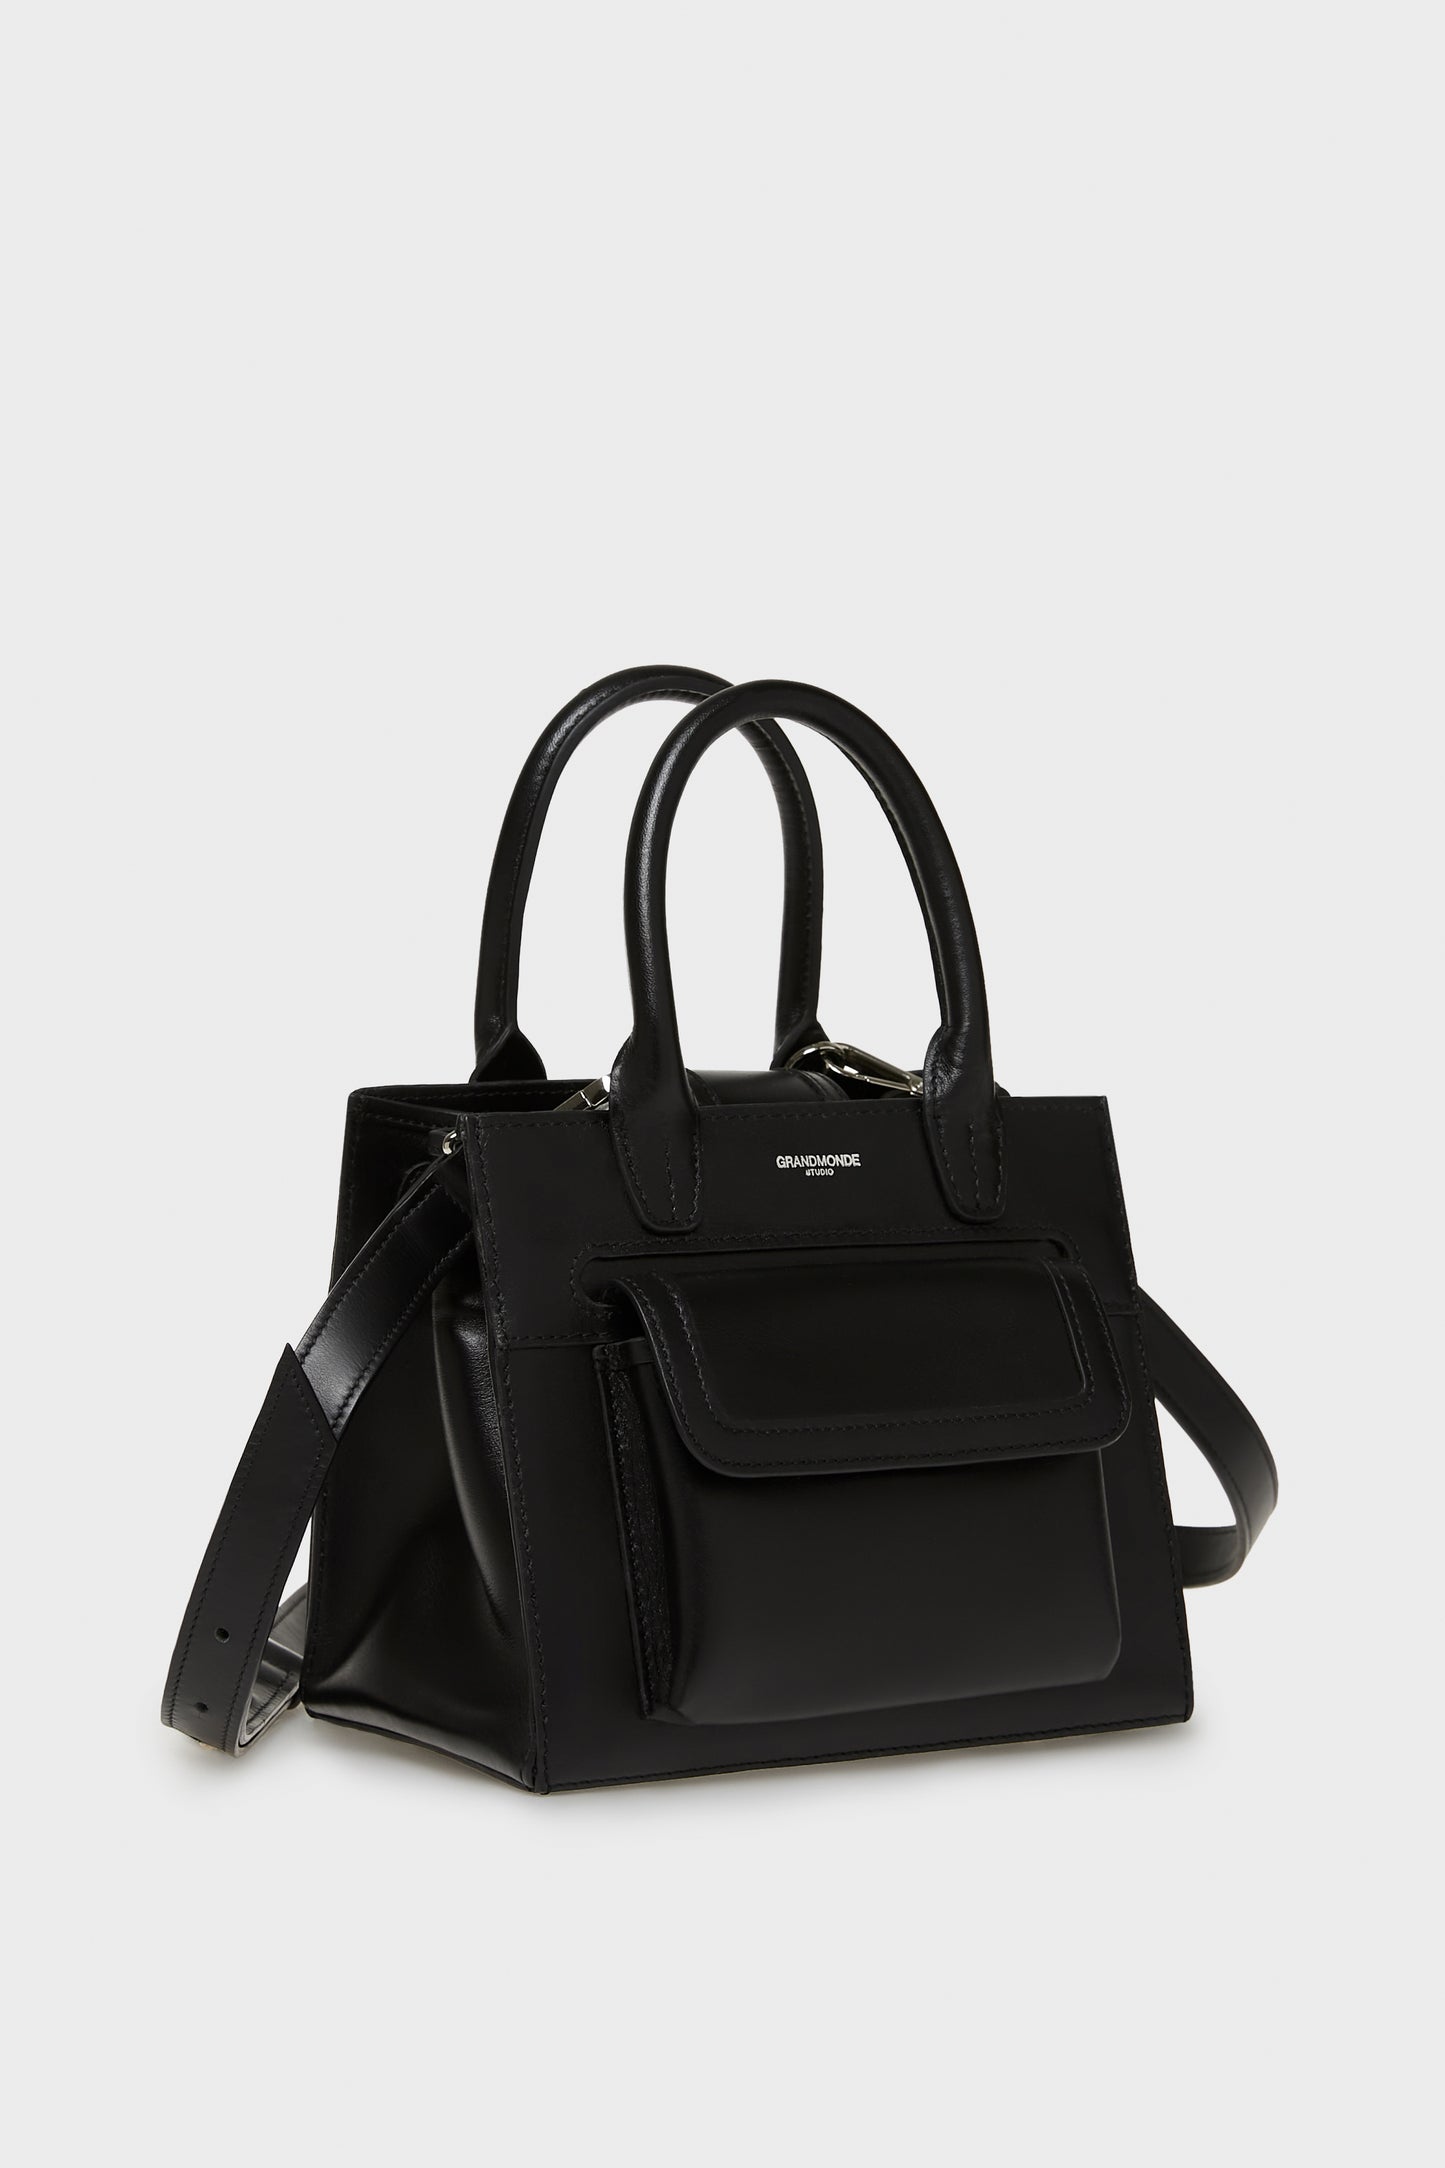 NOIR MUTMEE MINI TOTE BAG IN SMOOTH LEATHER